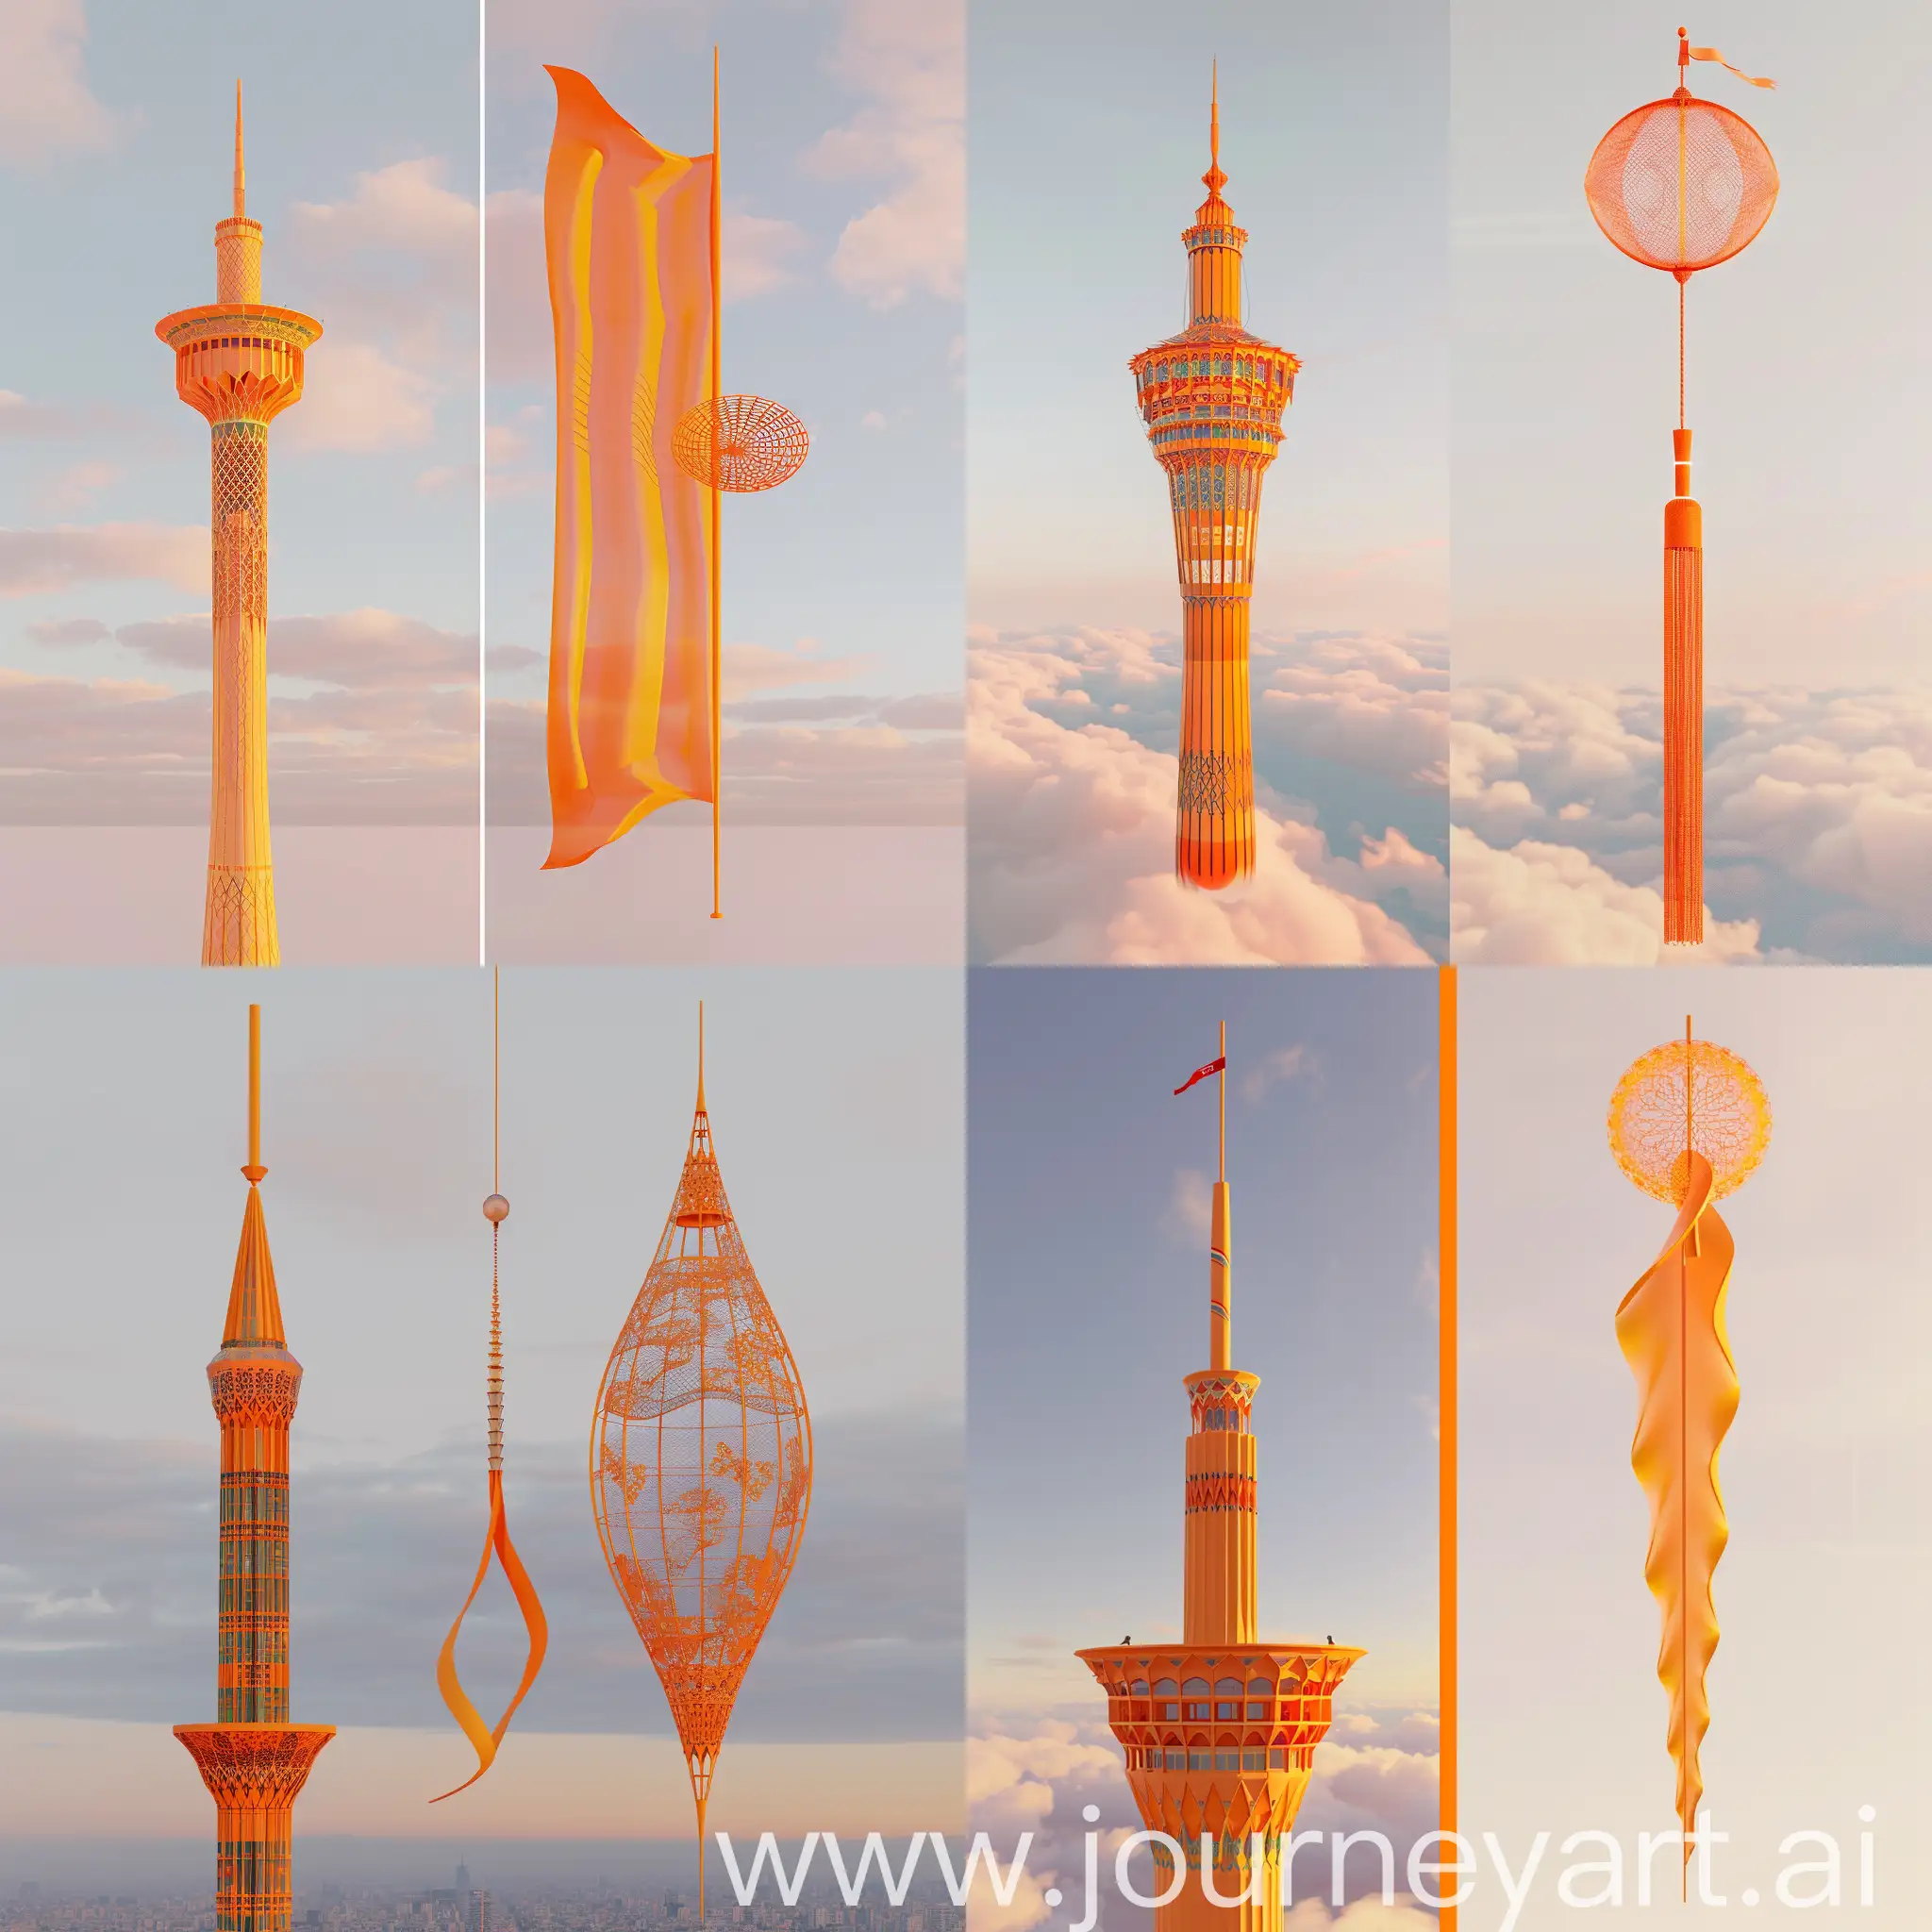 Tehran-Skyline-with-Milad-Tower-and-Traditional-Wind-Catcher-in-3D-Rendering